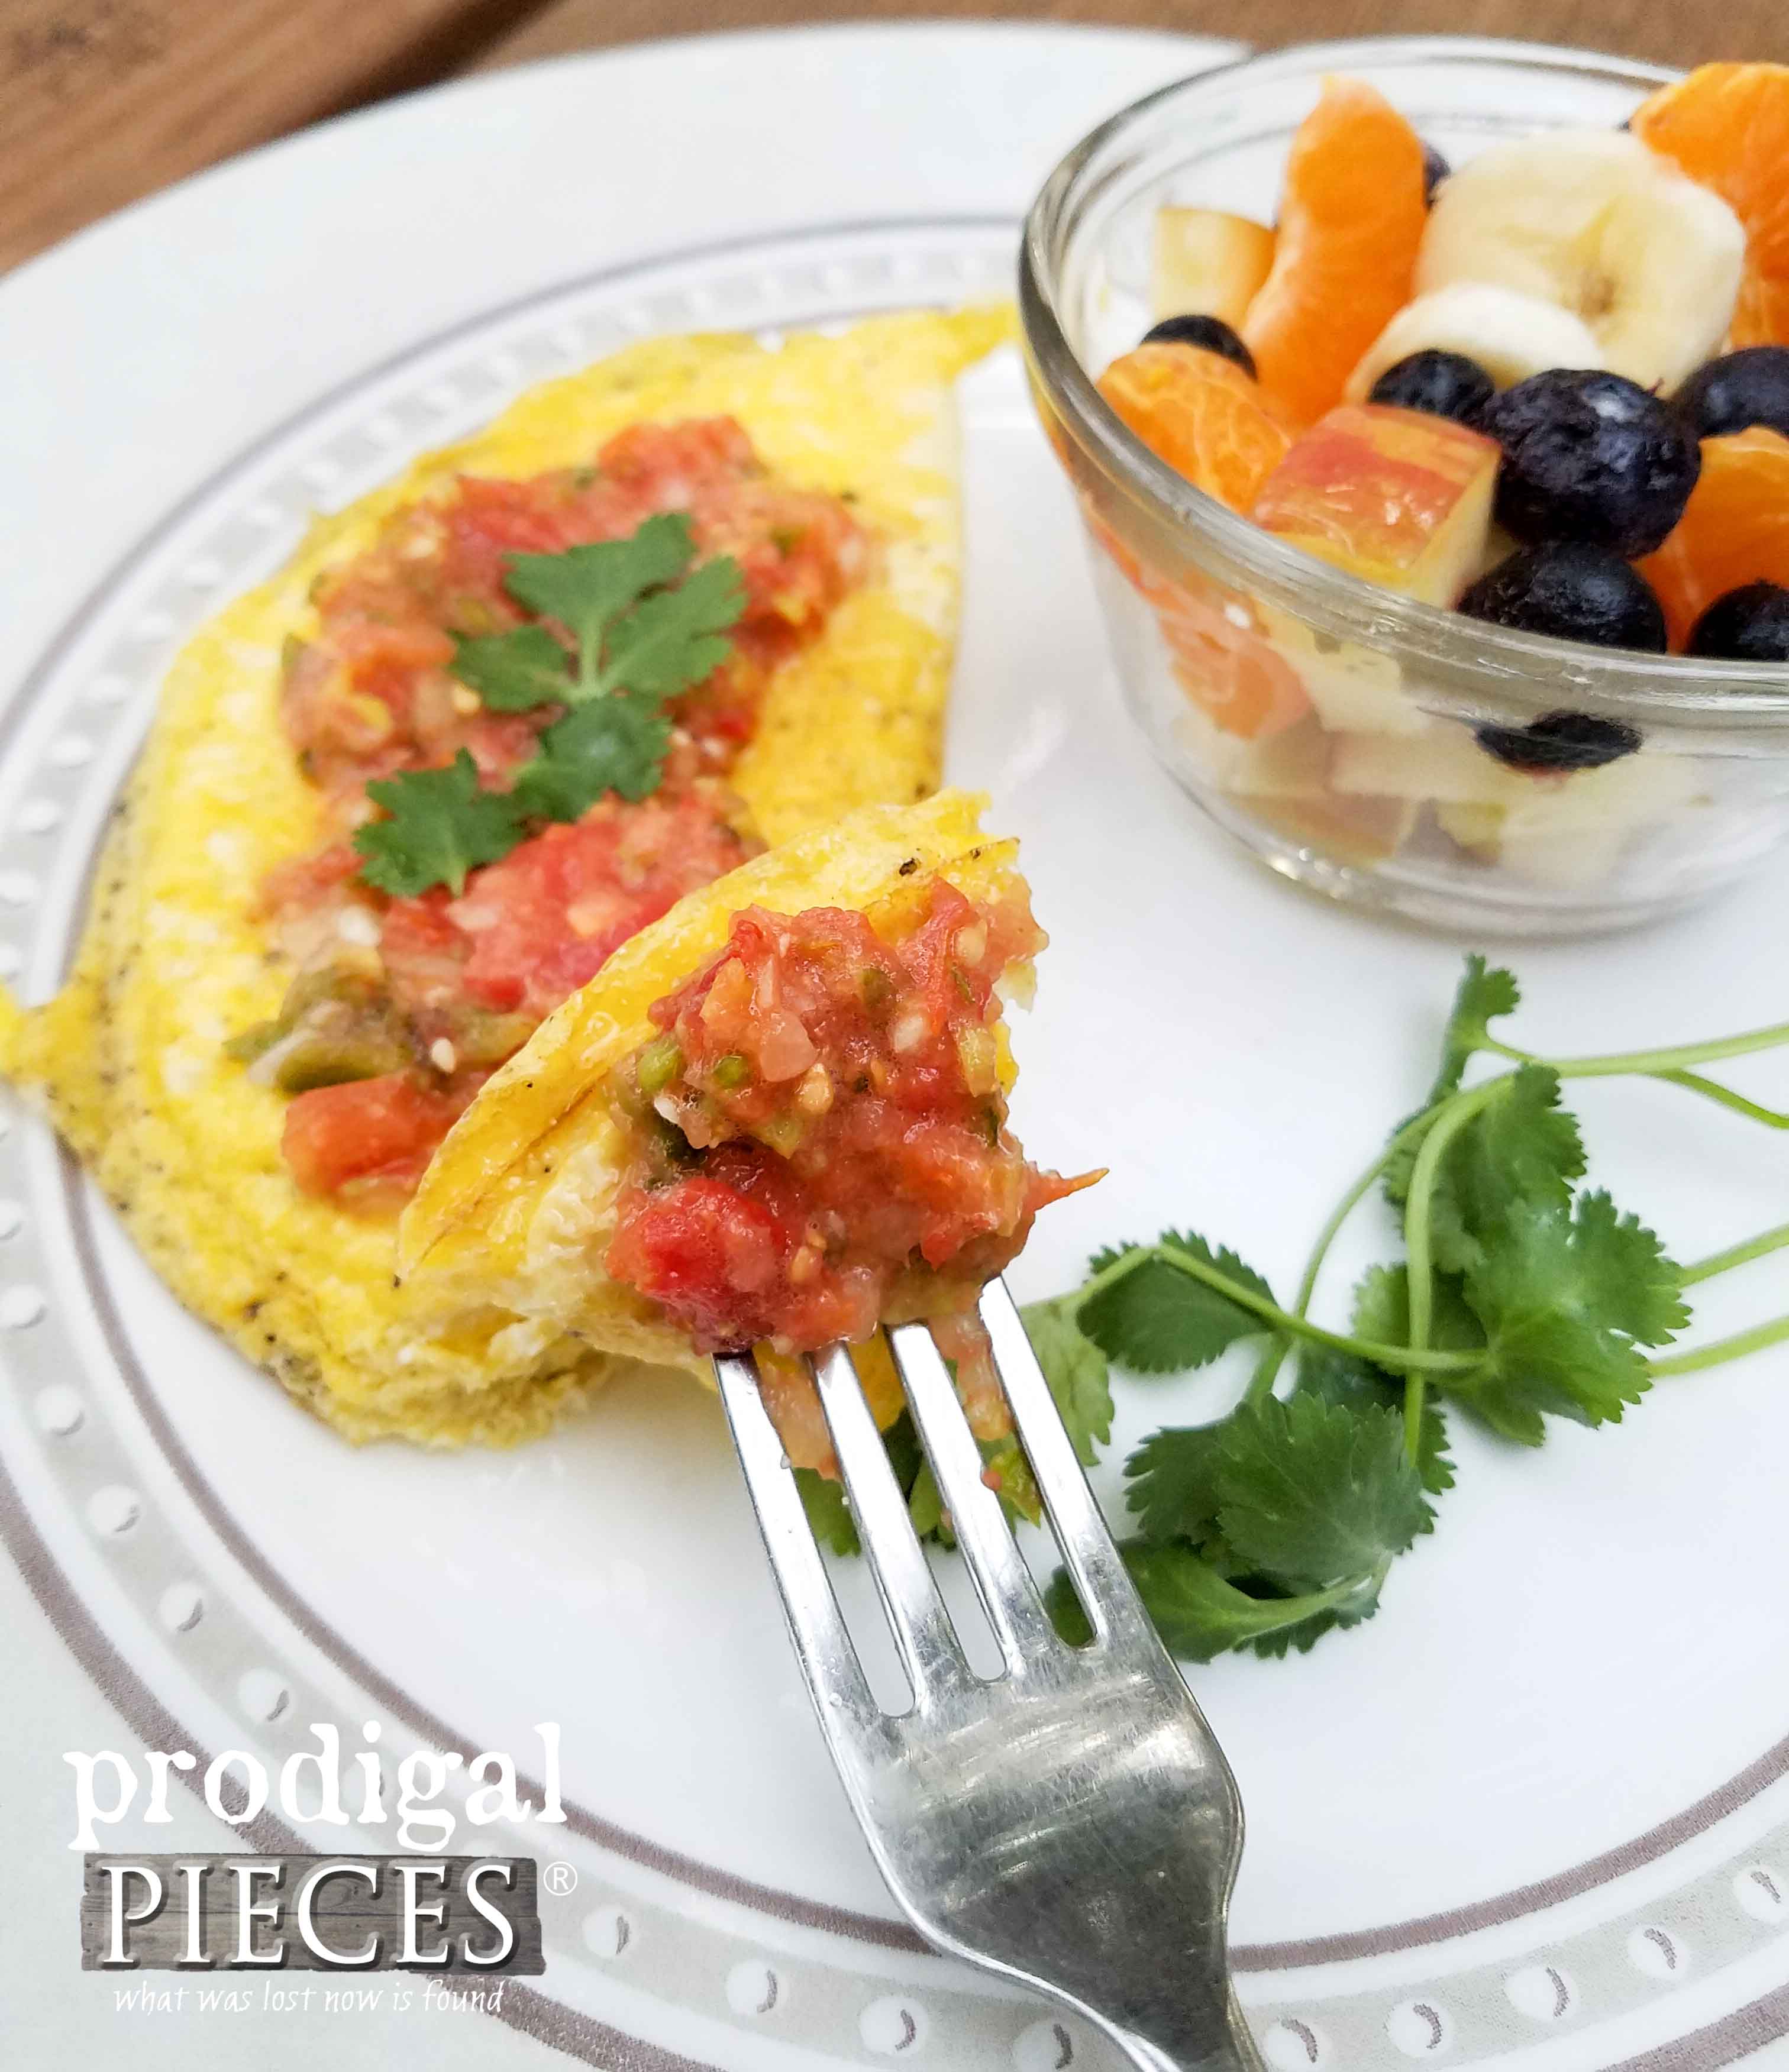 Fermented Salsa on Fried Egg with Fruit Salad for a Nourishing Breakfast by Prodigal Pieces | prodigalpieces.com